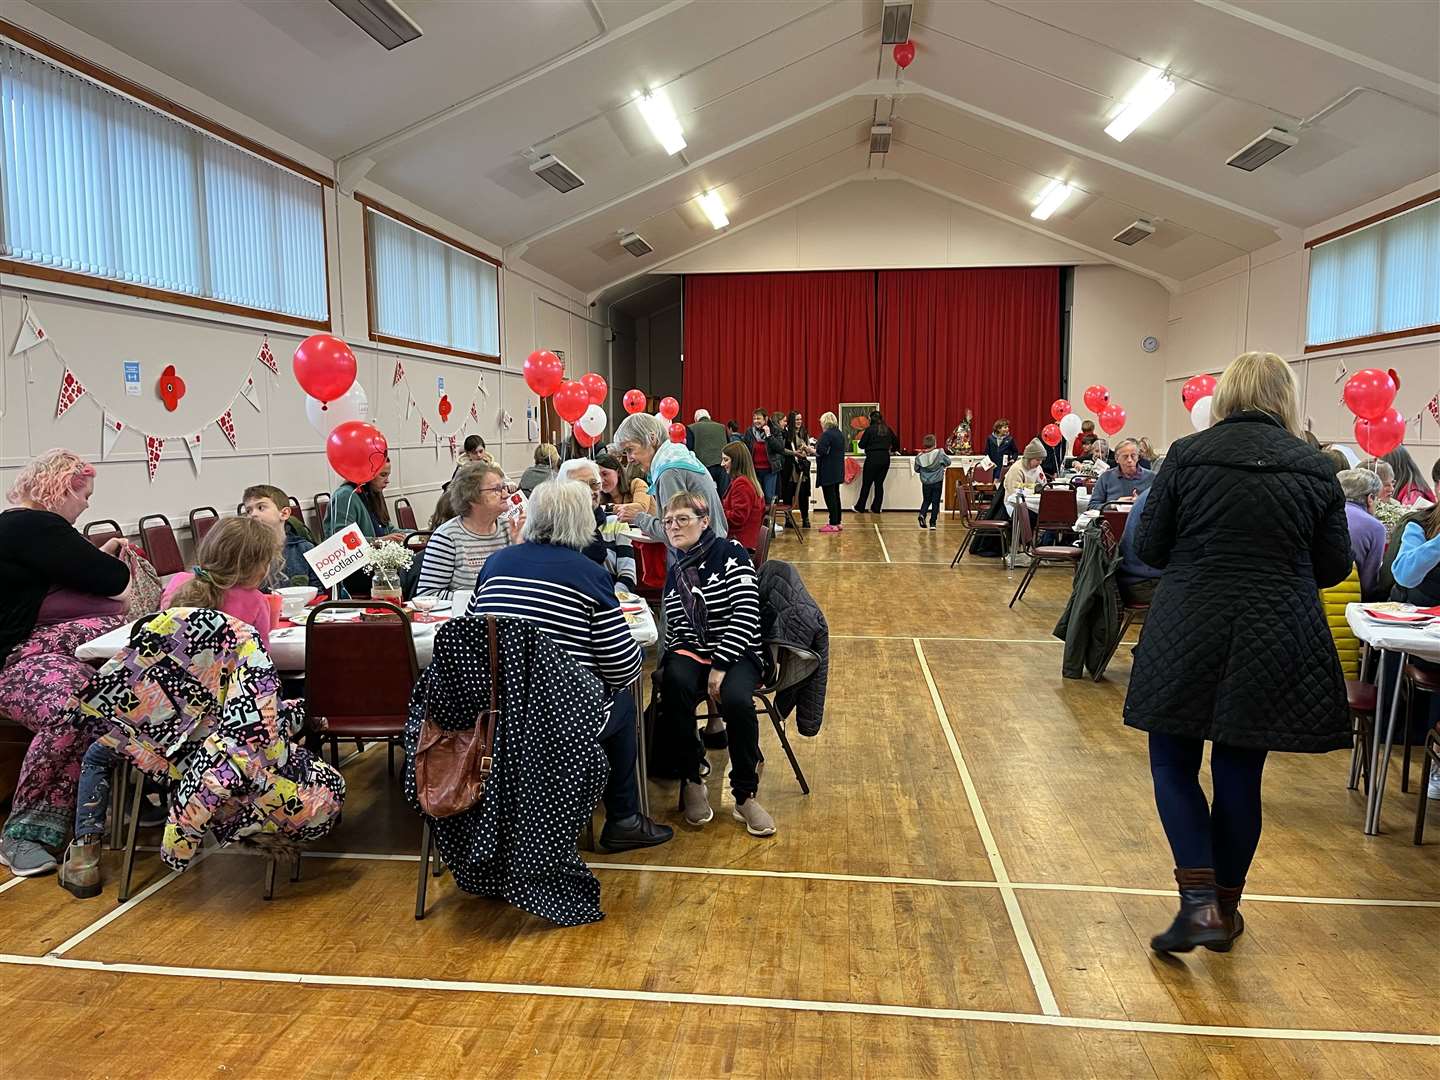 The soup and sweet event was held at Ardgay Hall.